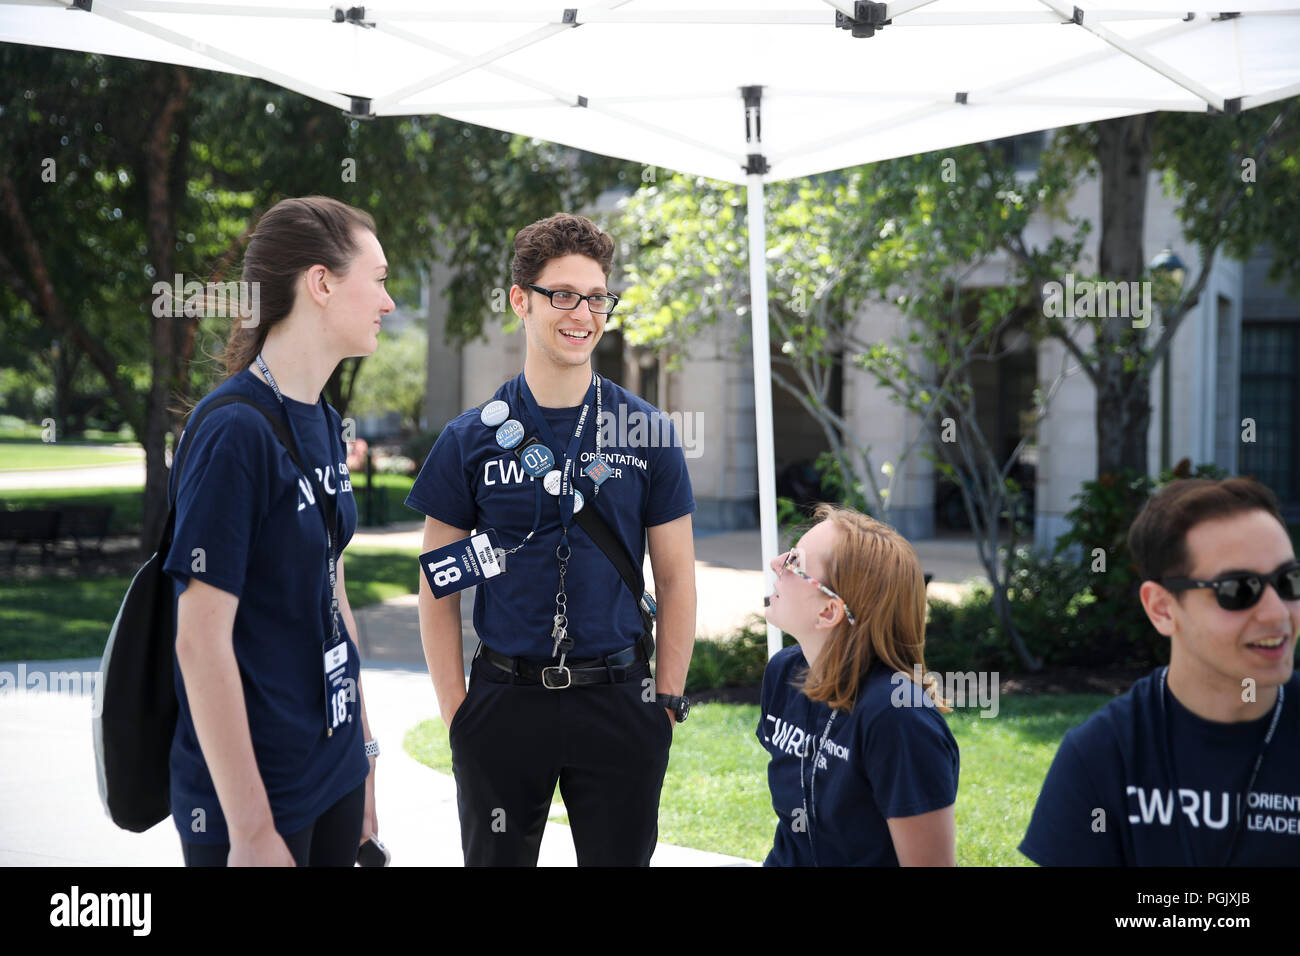 Ohio, USA. 23rd Aug, 2018. Students talk outside the Tinkham Veale University Center at Case Western Reserve University (CWRU) in Cleveland, Ohio, the United States, Aug. 23, 2018. It might not be as famous as the Ivy League schools, CWRU, located in Cleveland, the U.S. midwestern state of Ohio, is among the top American universities that Chinese students choose to study in. TO GO WITH Feature: Midwest U.S. university aspires to attract more Chinese students Credit: Wang Ying/Xinhua/Alamy Live News Stock Photo